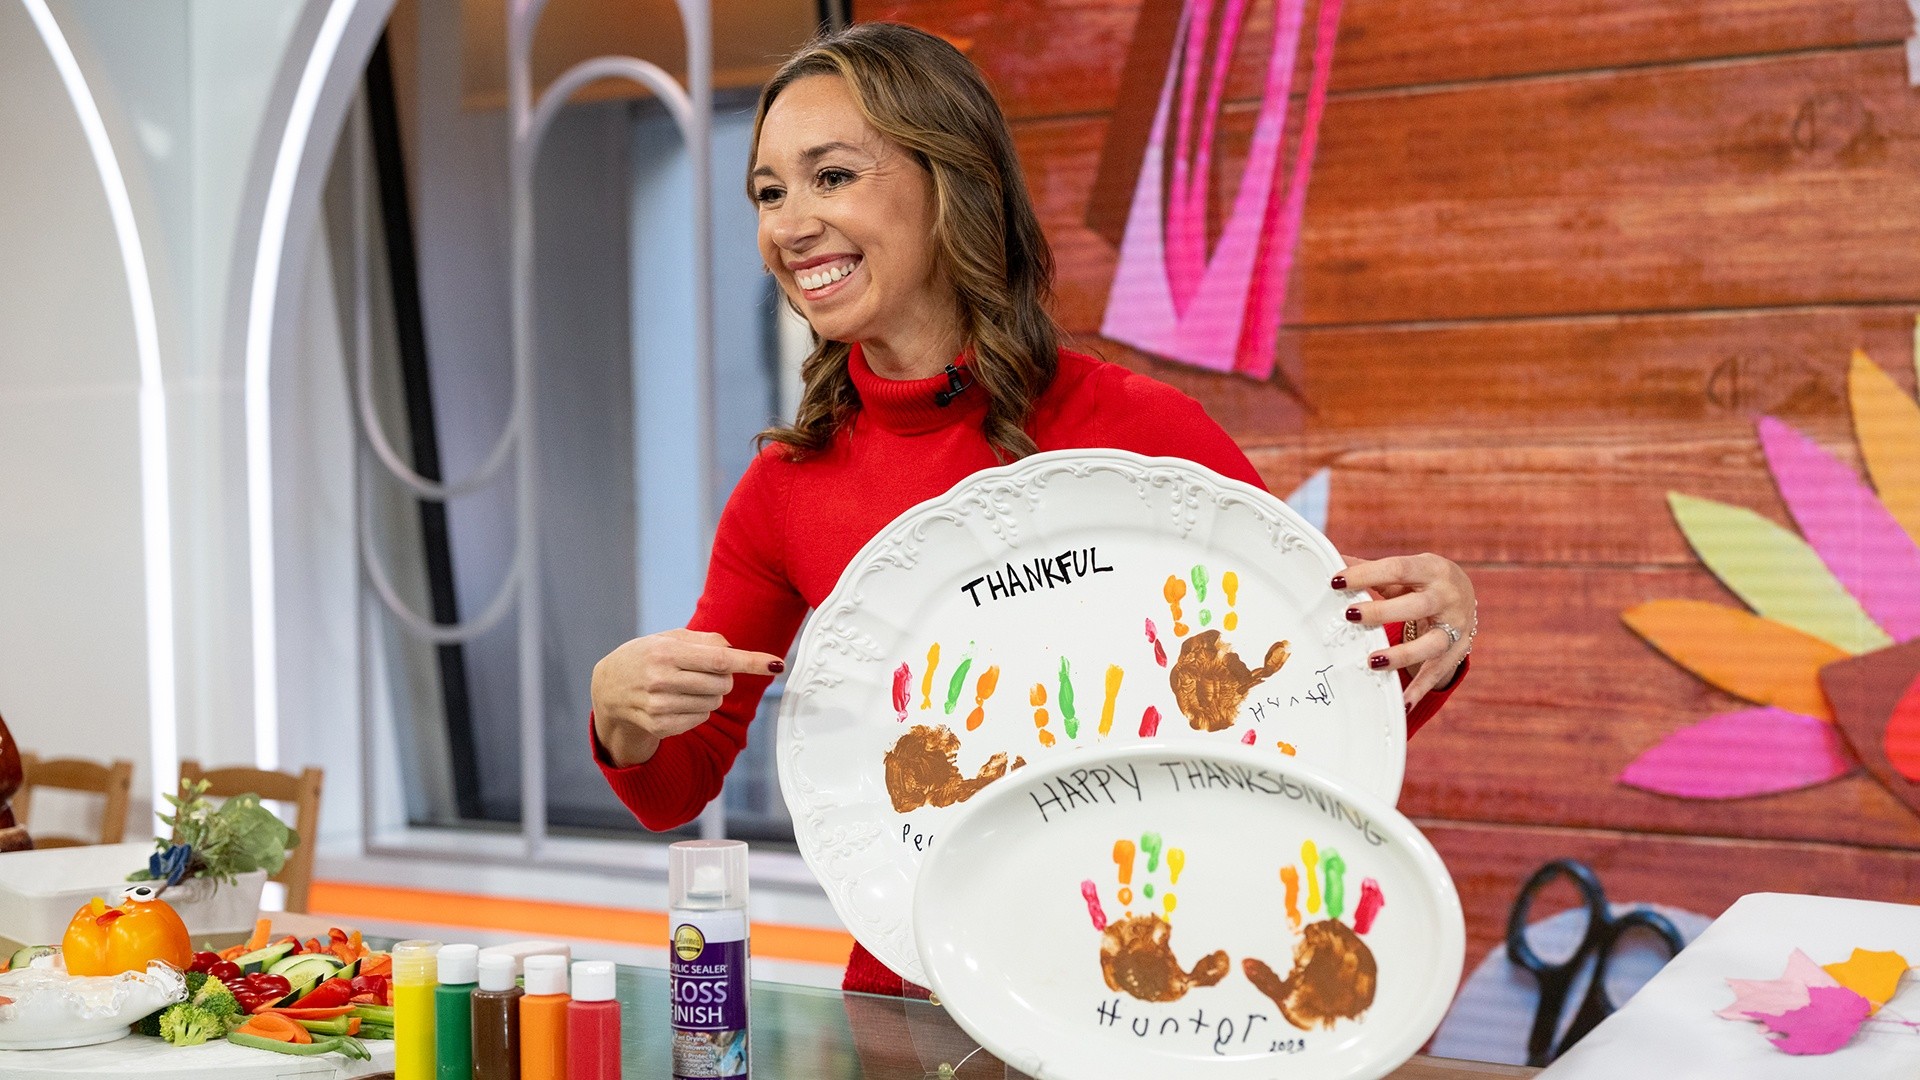 Get the whole family involved with these fun Thanksgiving crafts